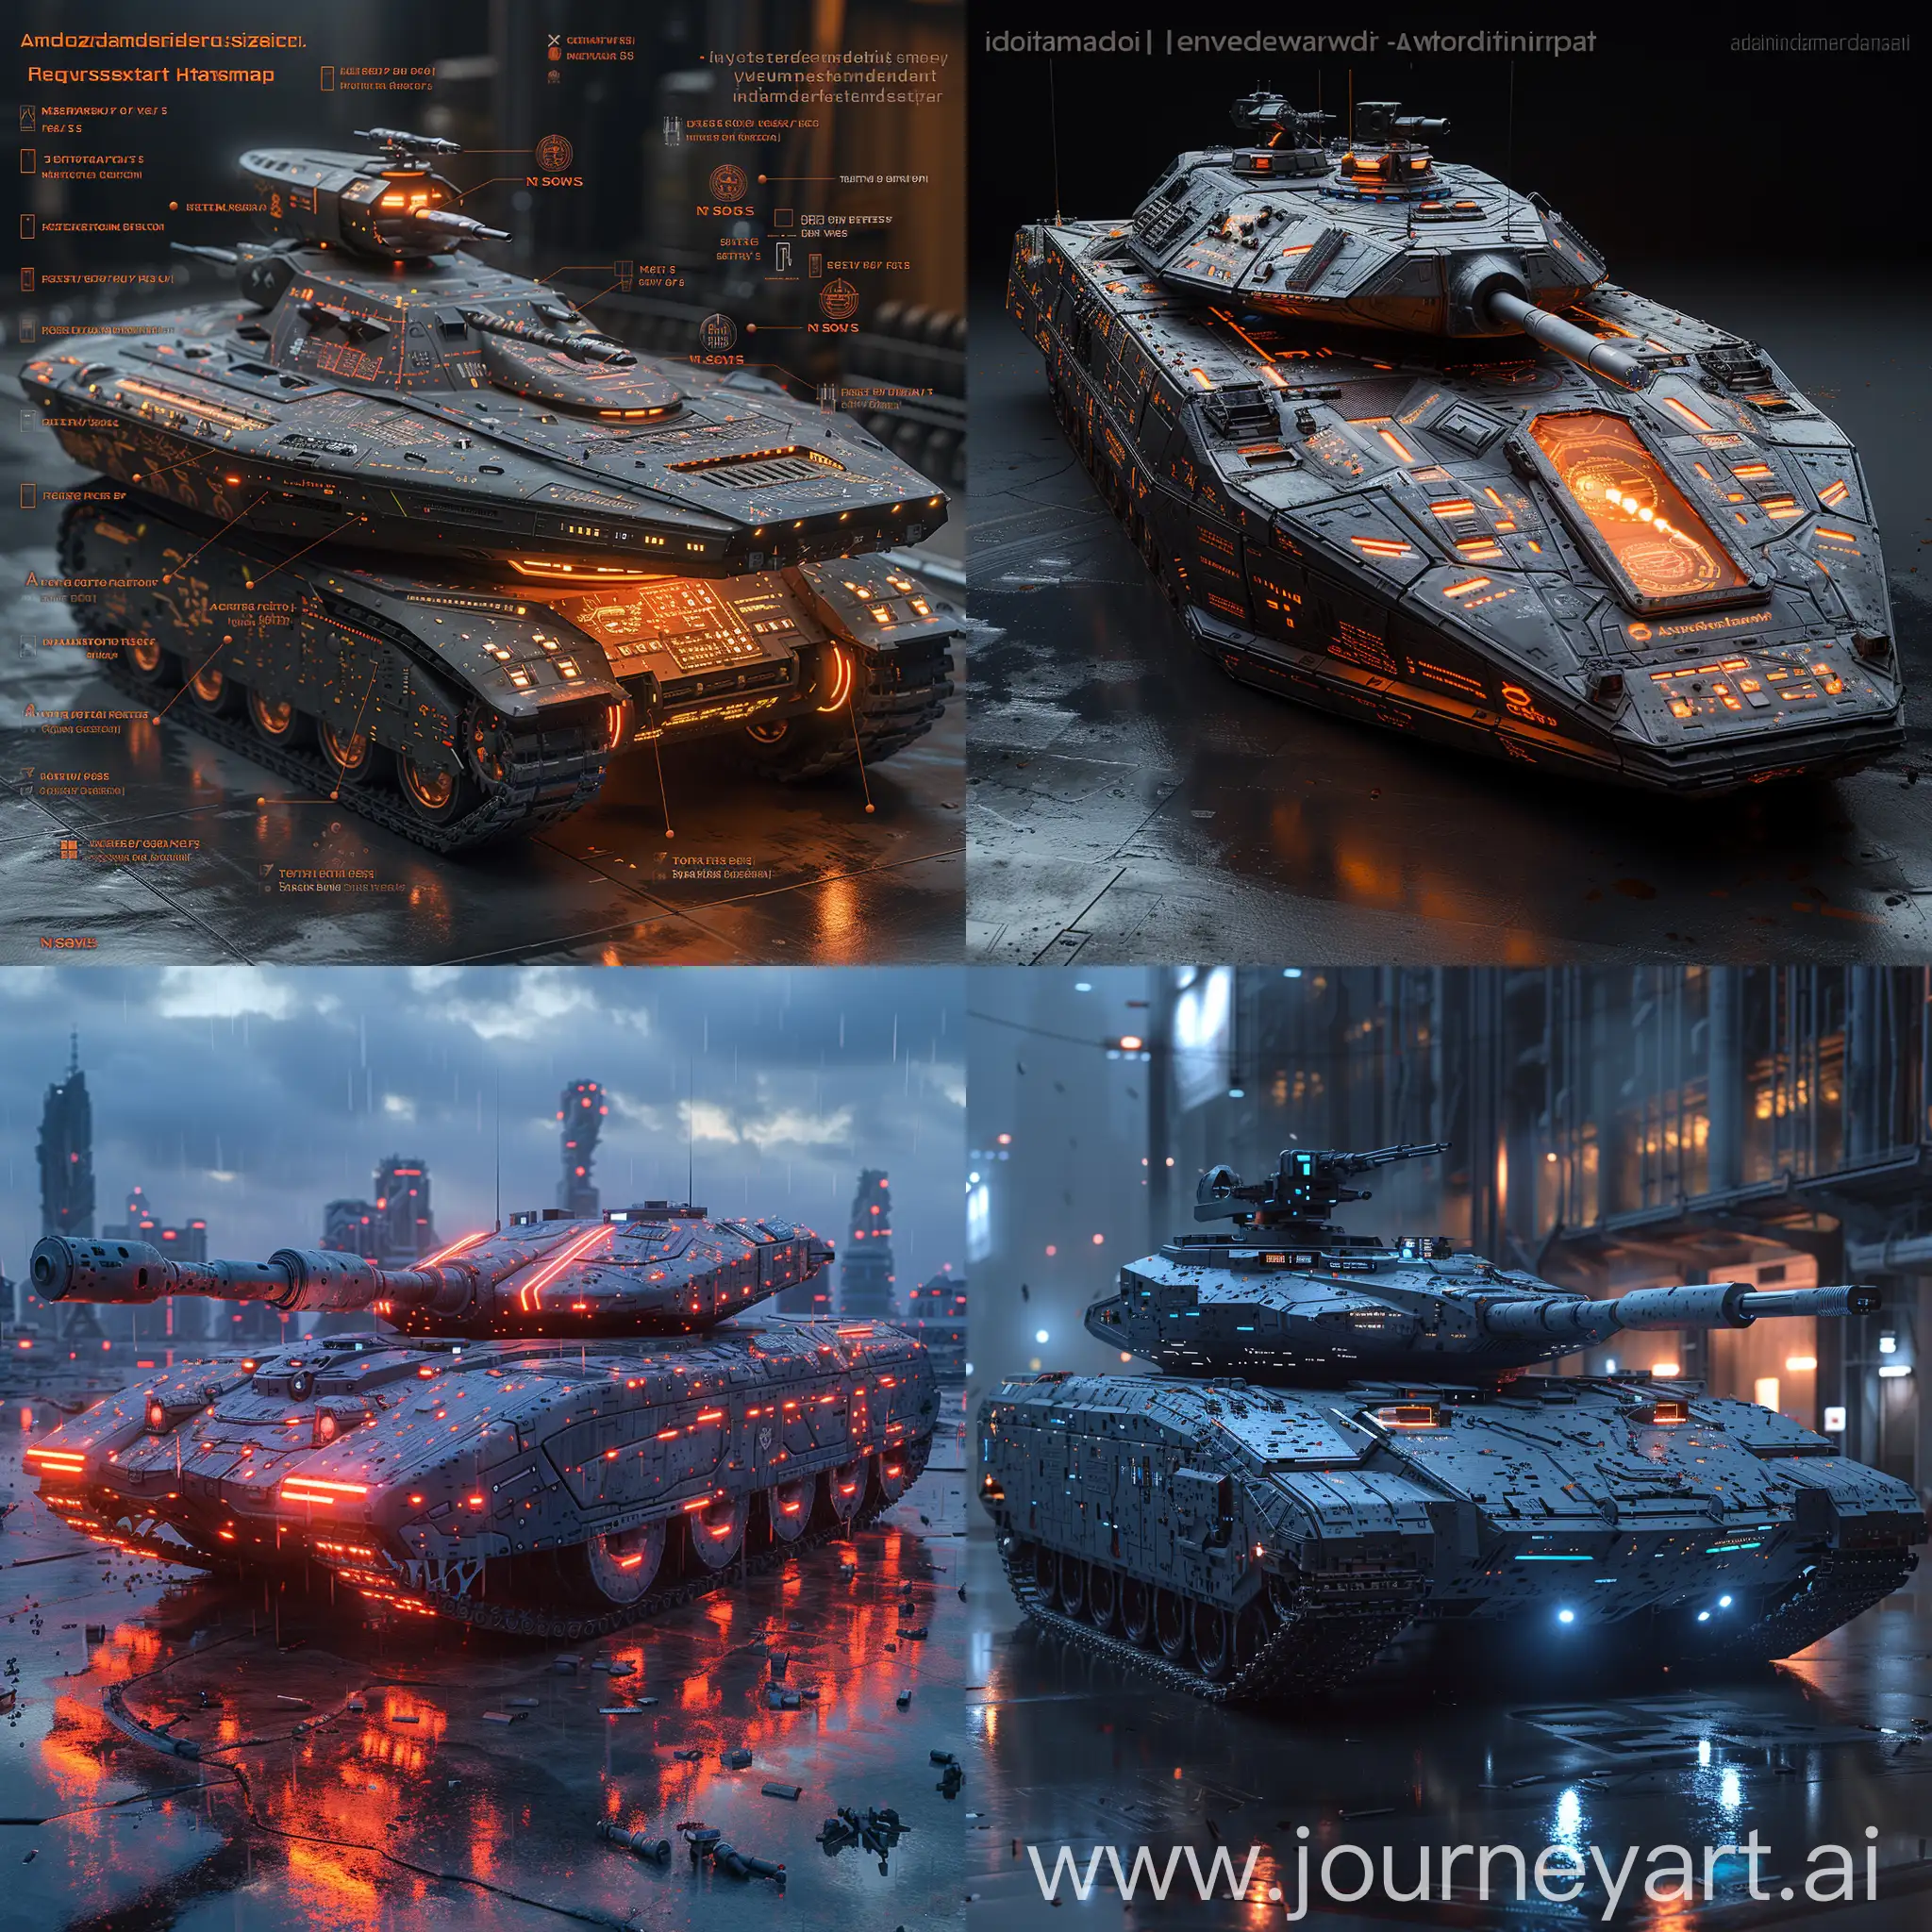 Futuristic-Tank-with-Advanced-Armor-and-Integrated-AI-Systems